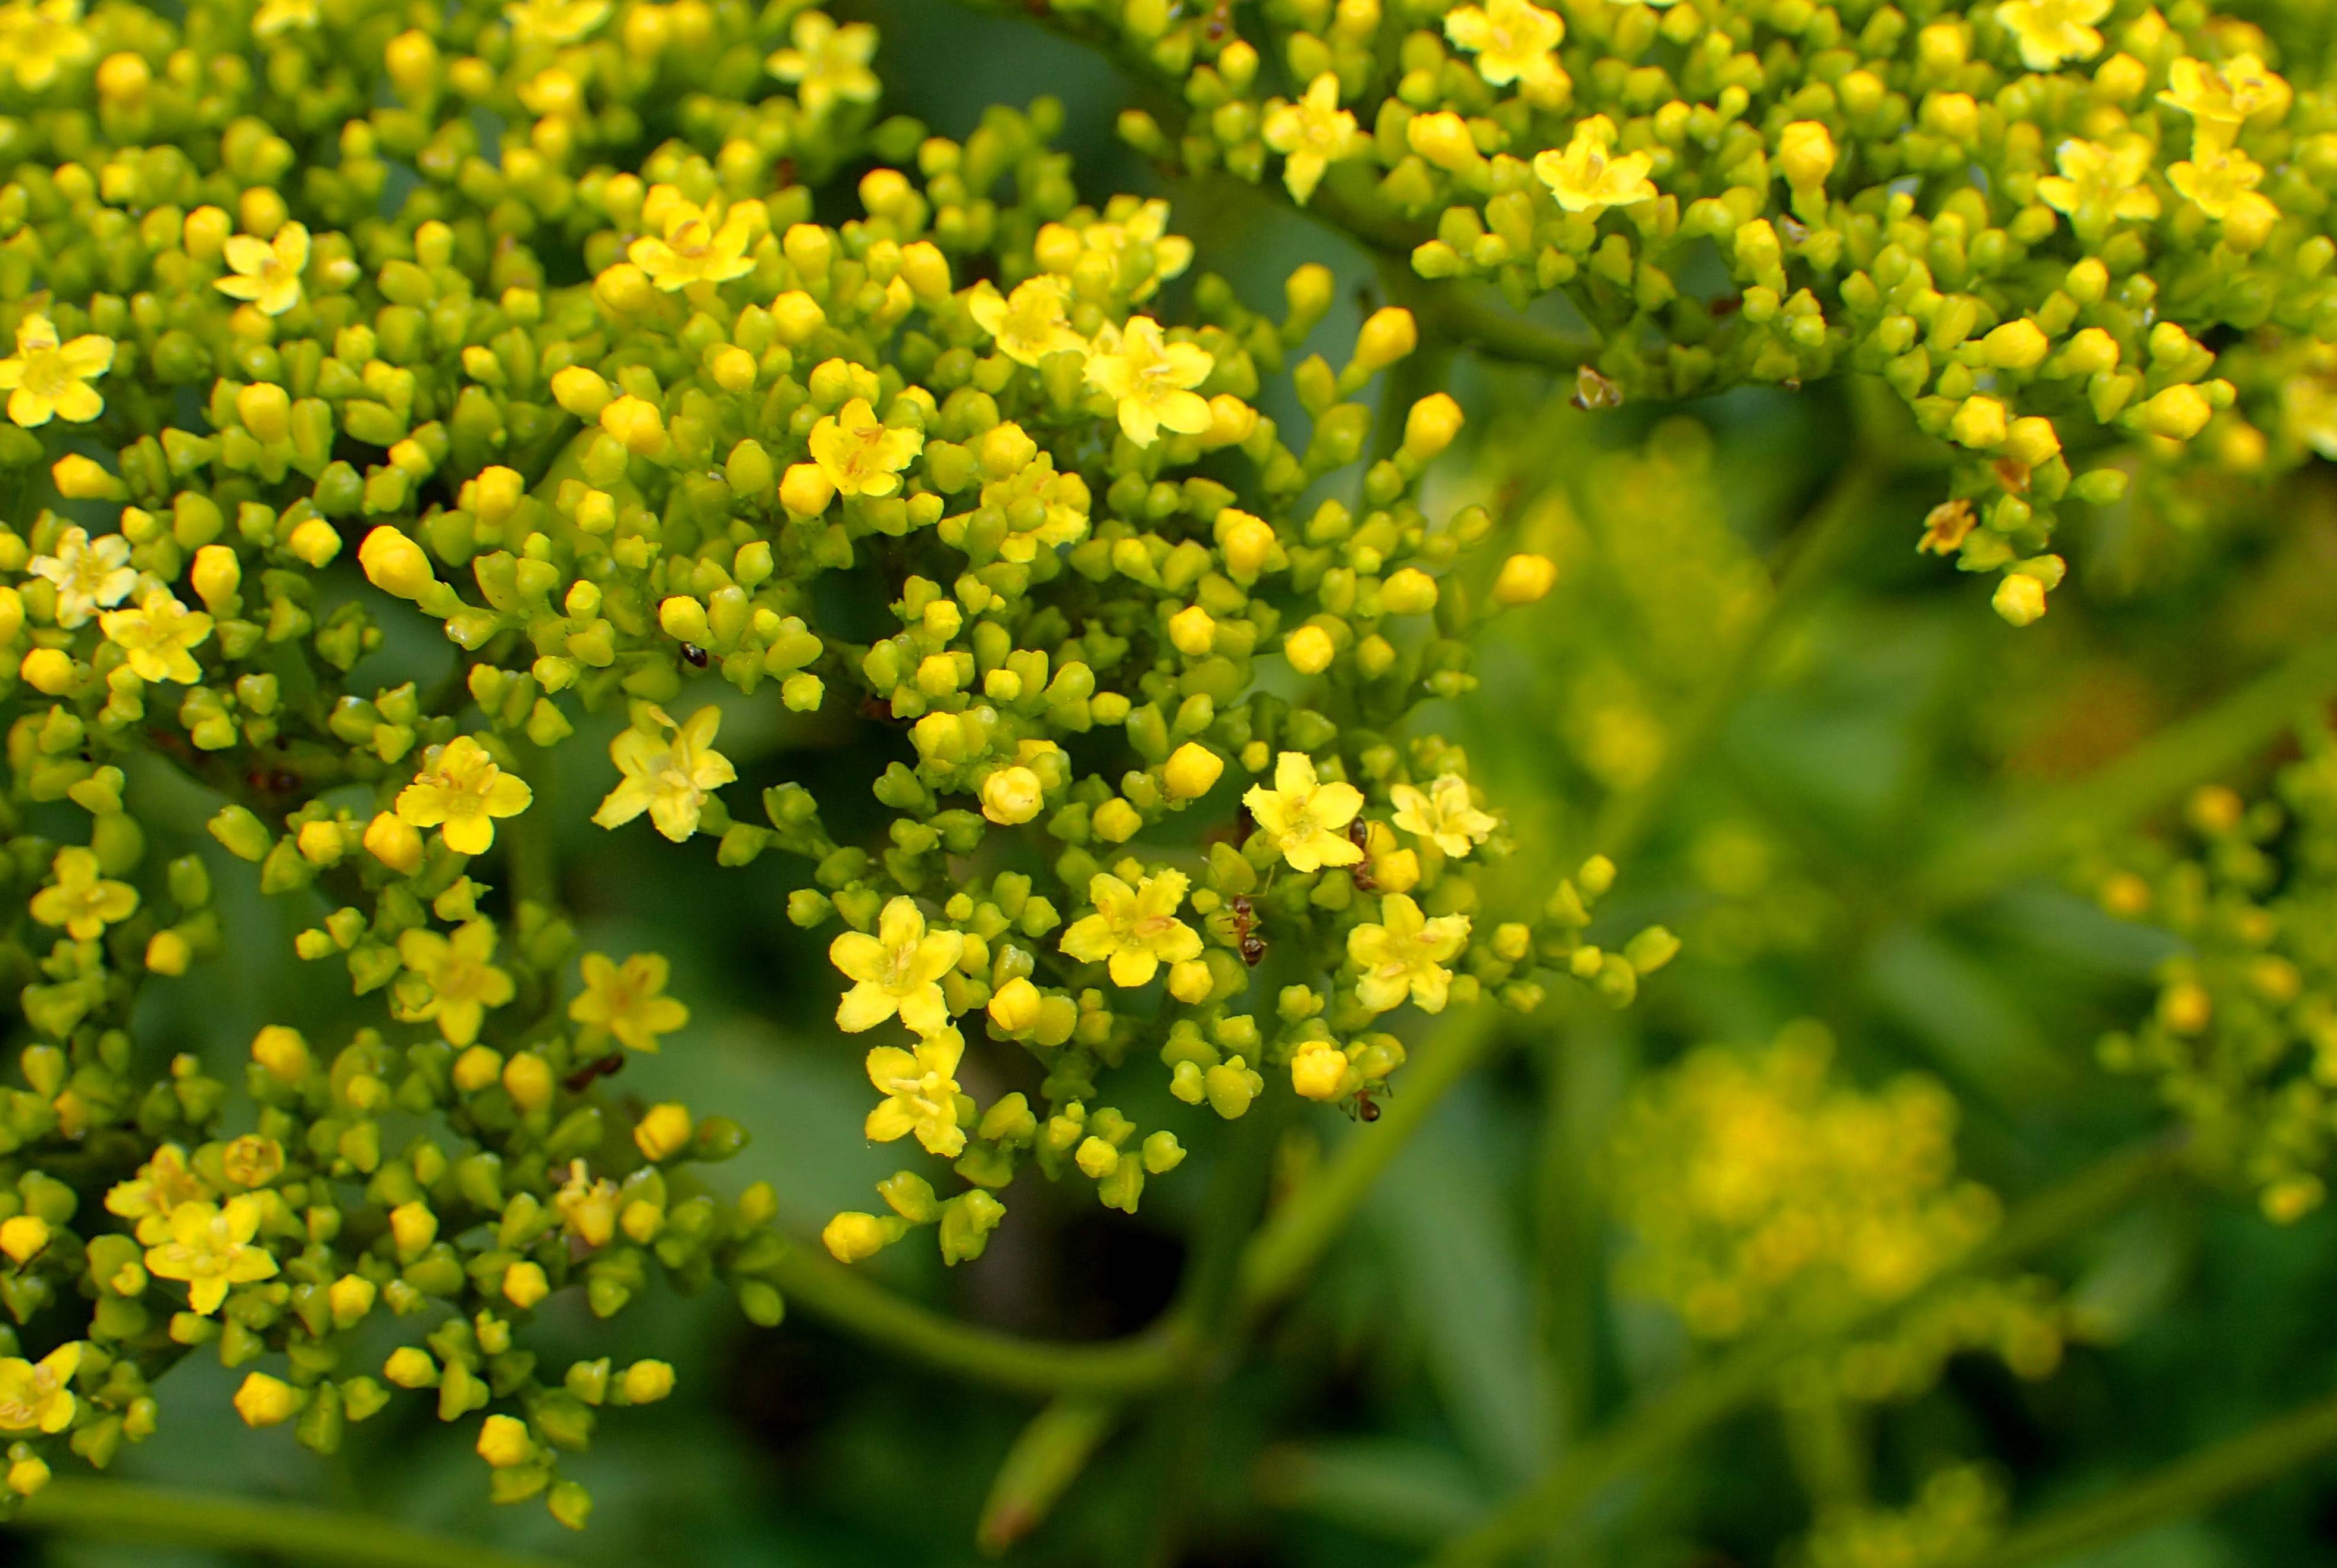 cluster of small, yellow, star-like flowers and yellow-green buds, and green stems